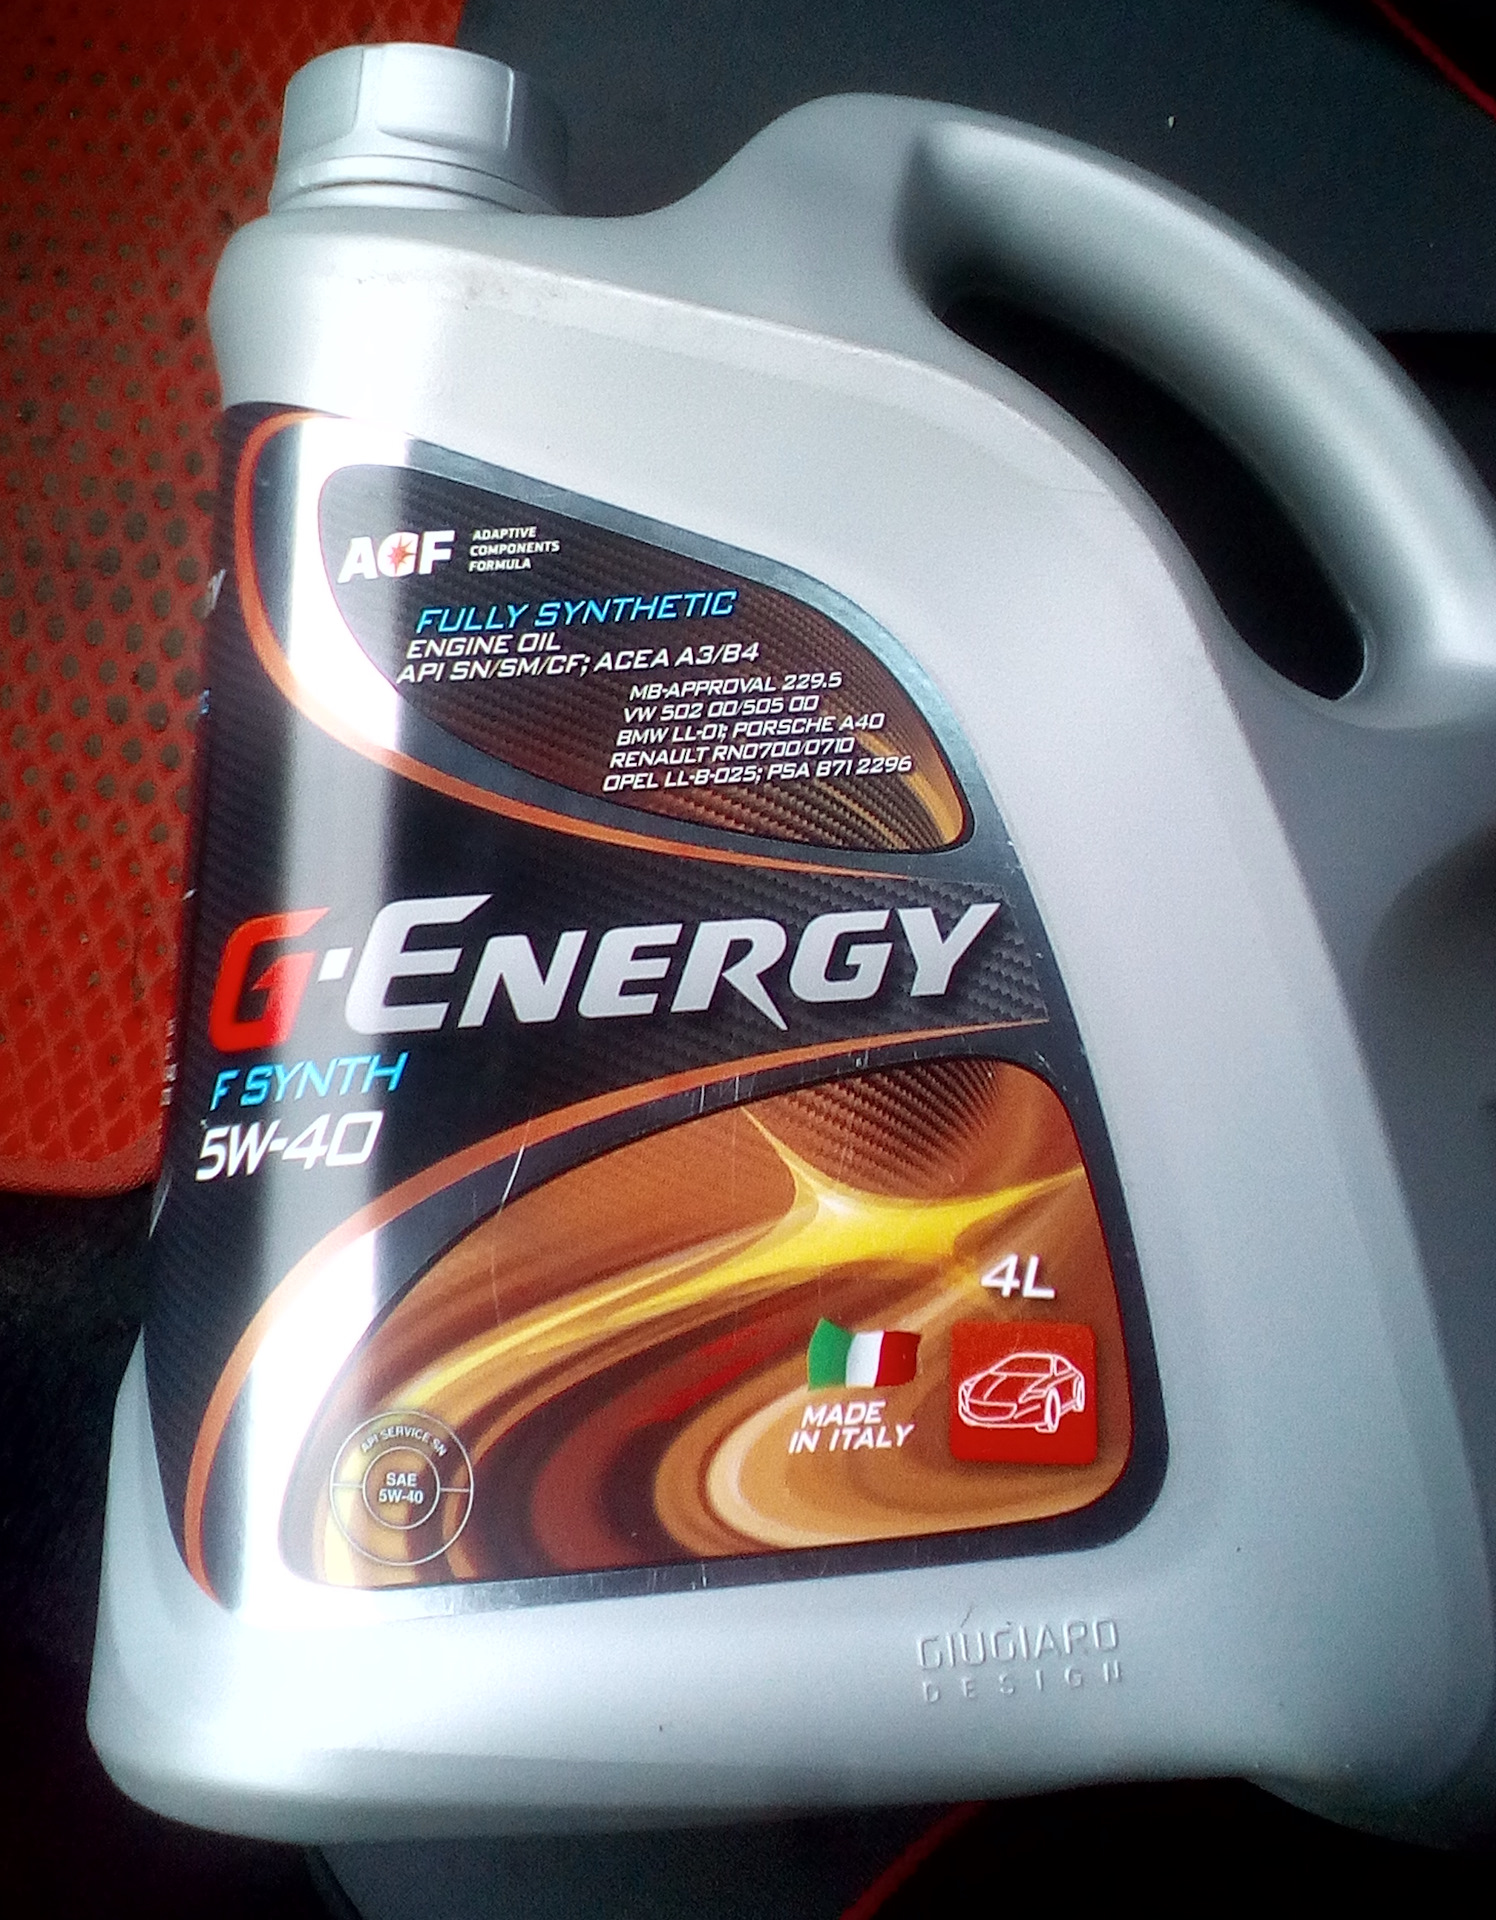 G-Energy f Synth 5w-40. G Energy 5w40 fully Synthetic. G Energy 5w40 Outlander 2.4. 8034108190075 G-Energy. Energy 5 adventure